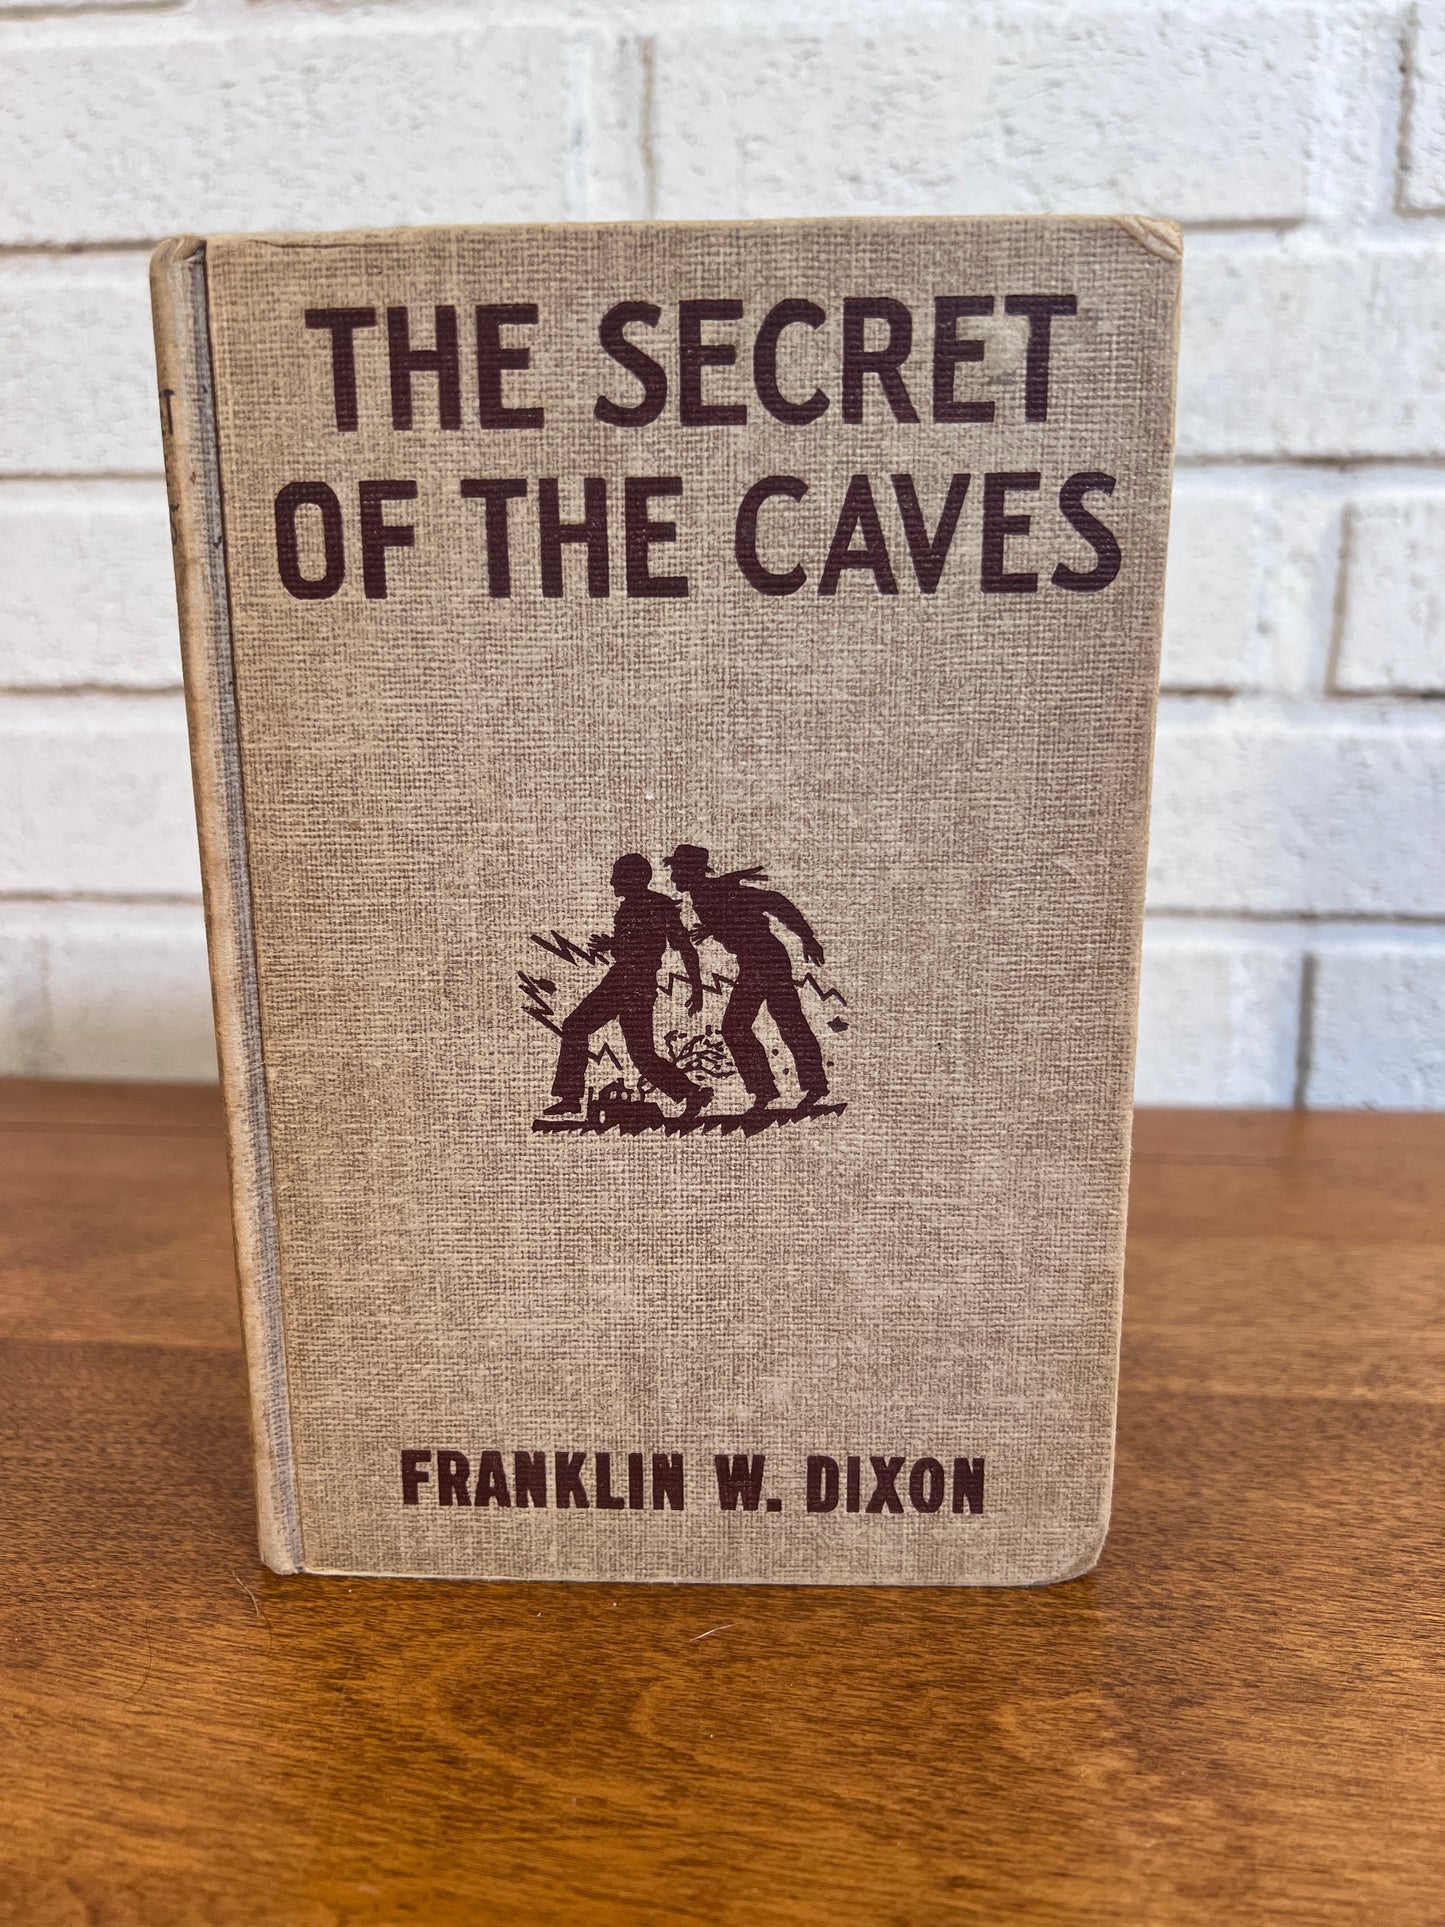 The Secret of the Caves #7 by Franklin W. Dixon - The Hardy Boys